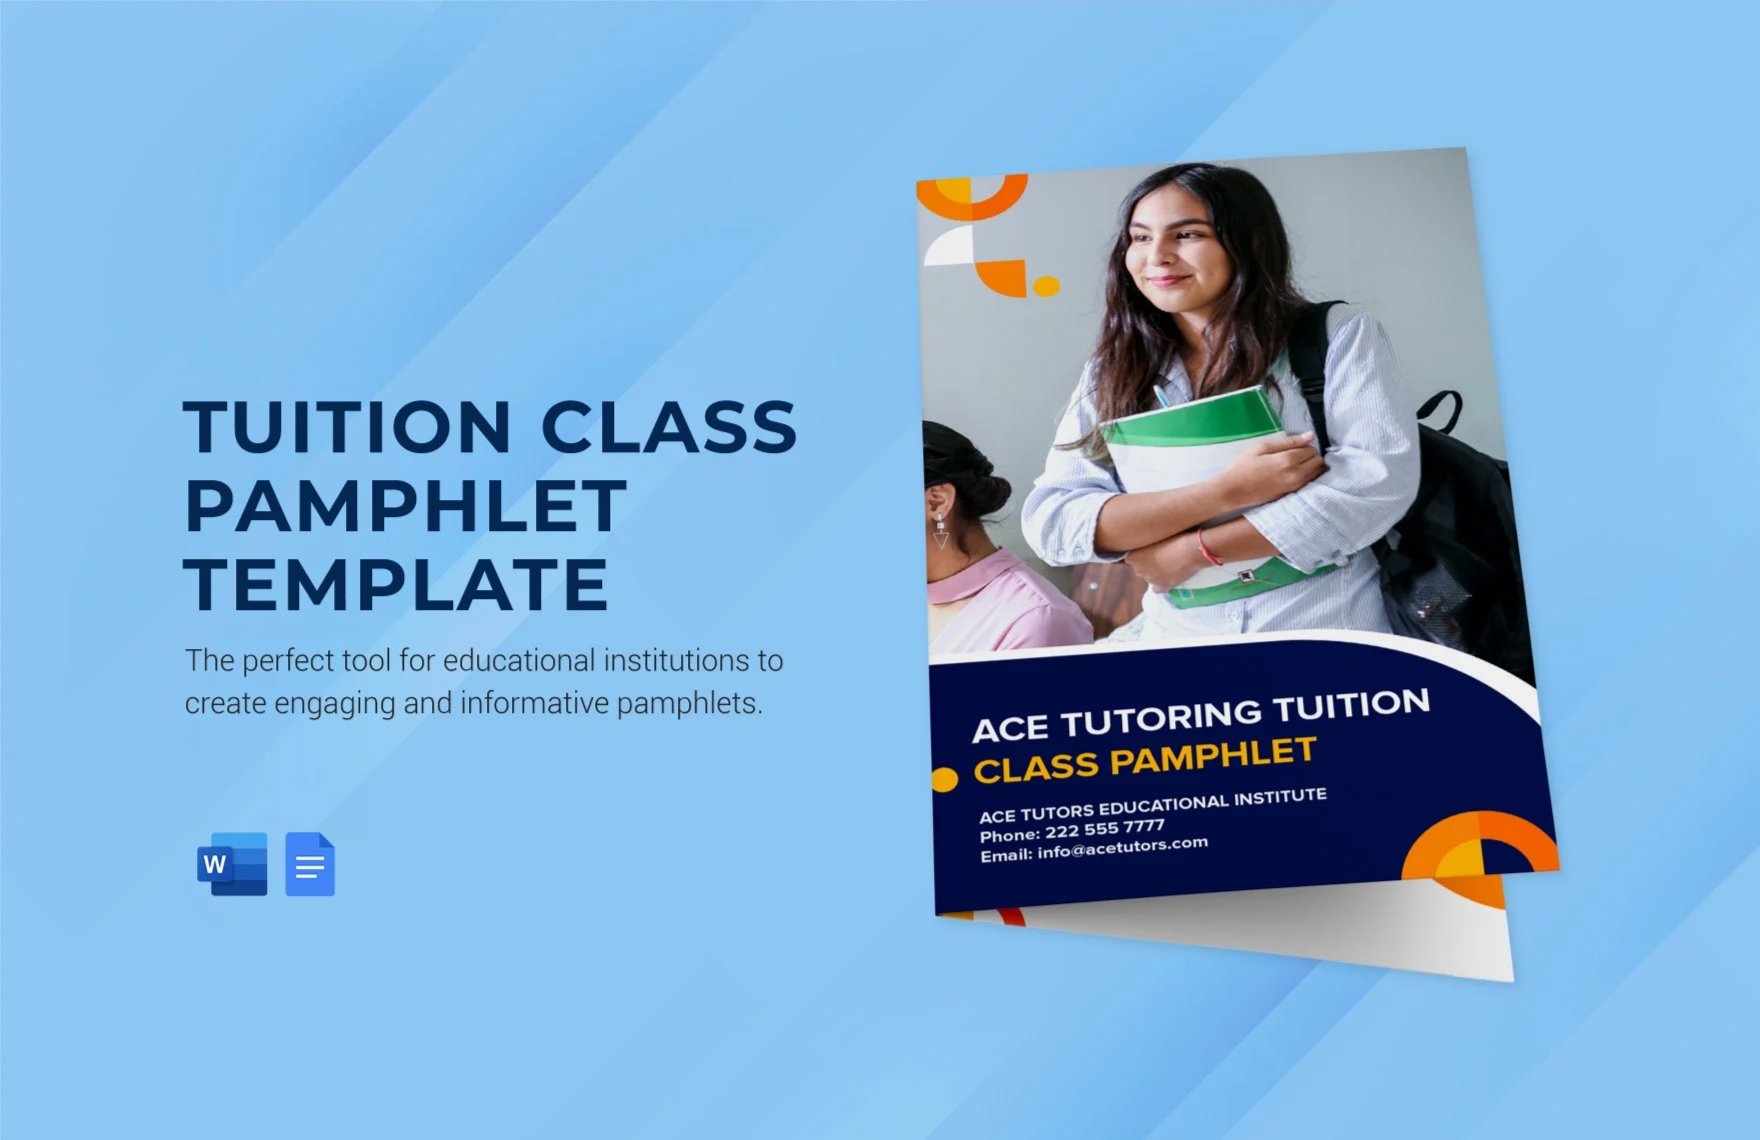 Free Tuition Class Pamphlet Template in Word, Google Docs